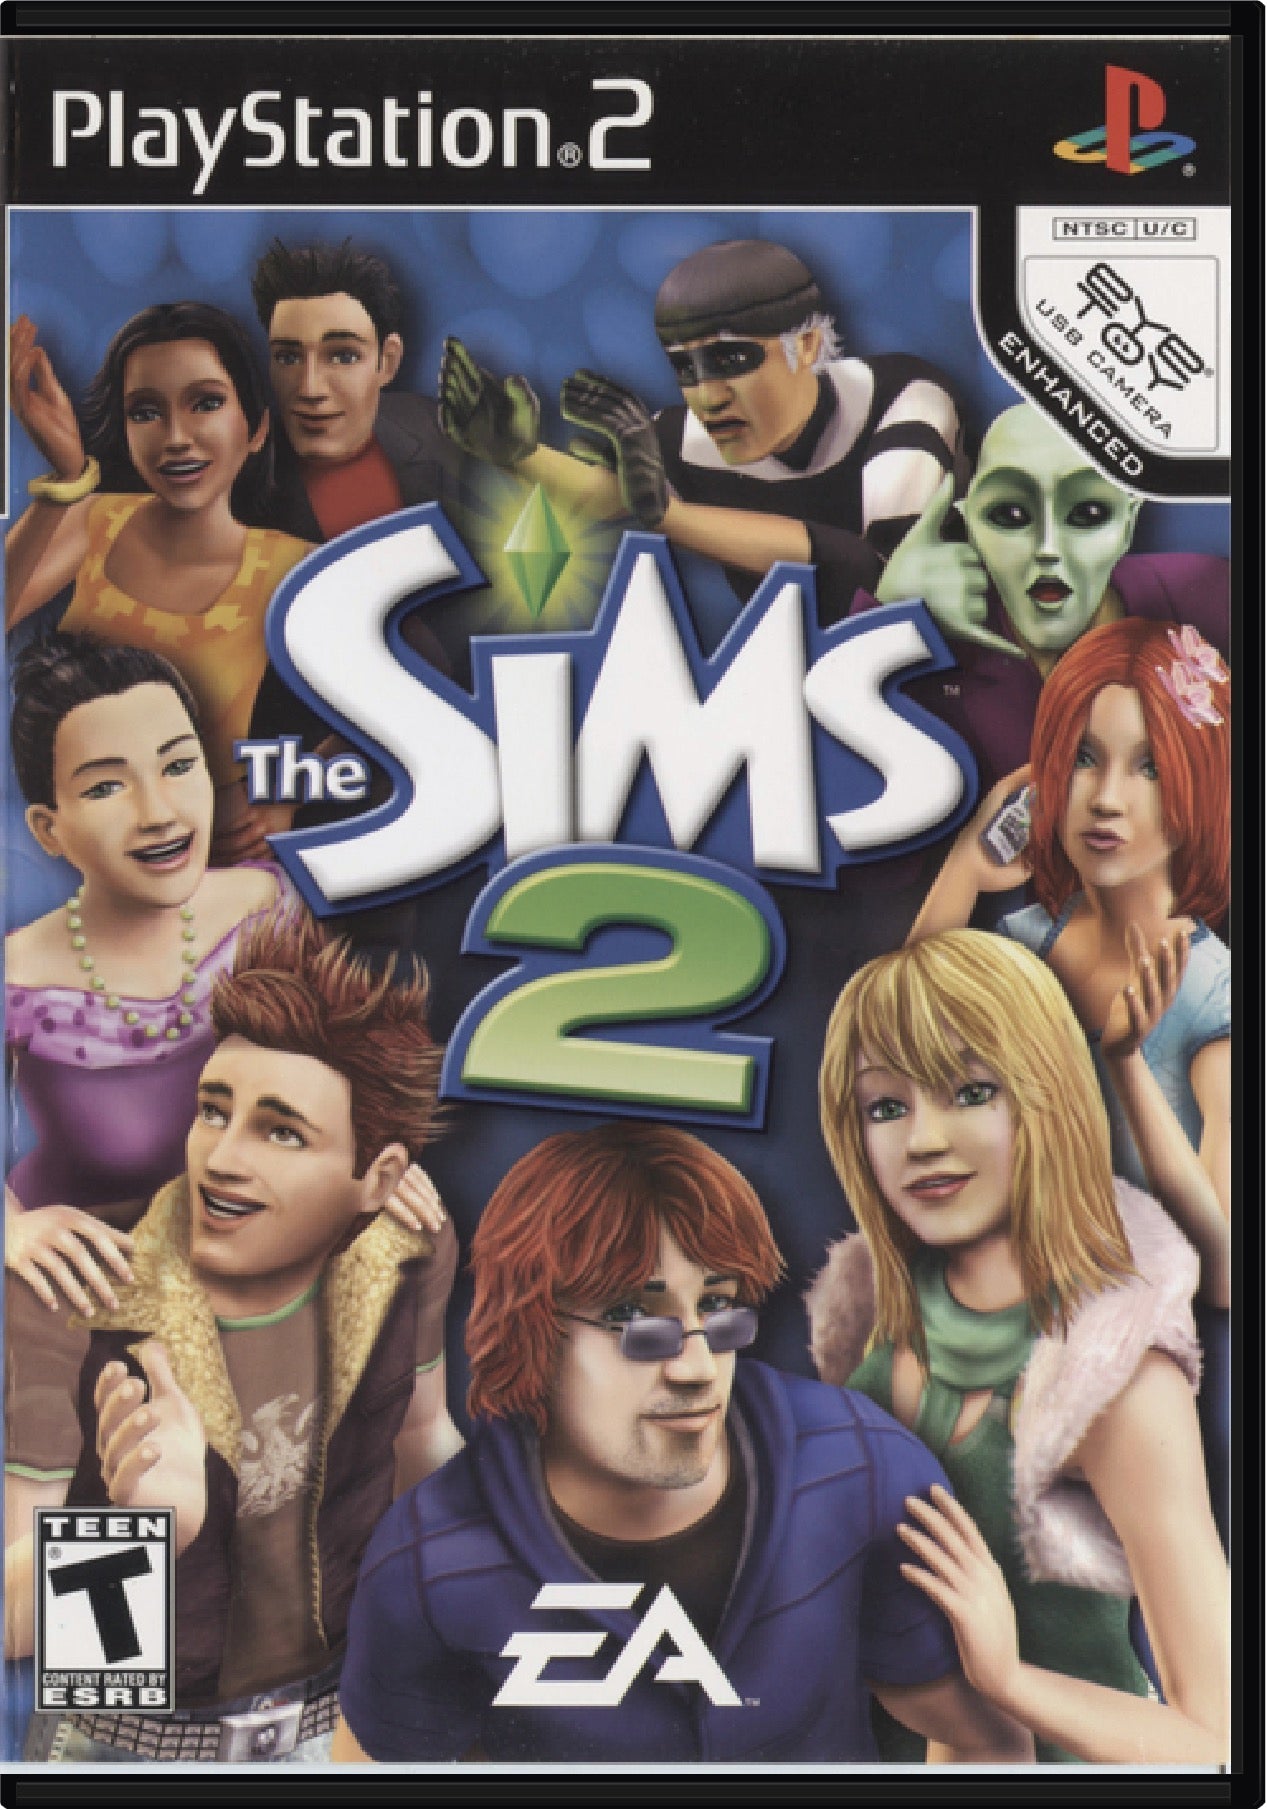 The Sims 2 Cover Art and Product Photo